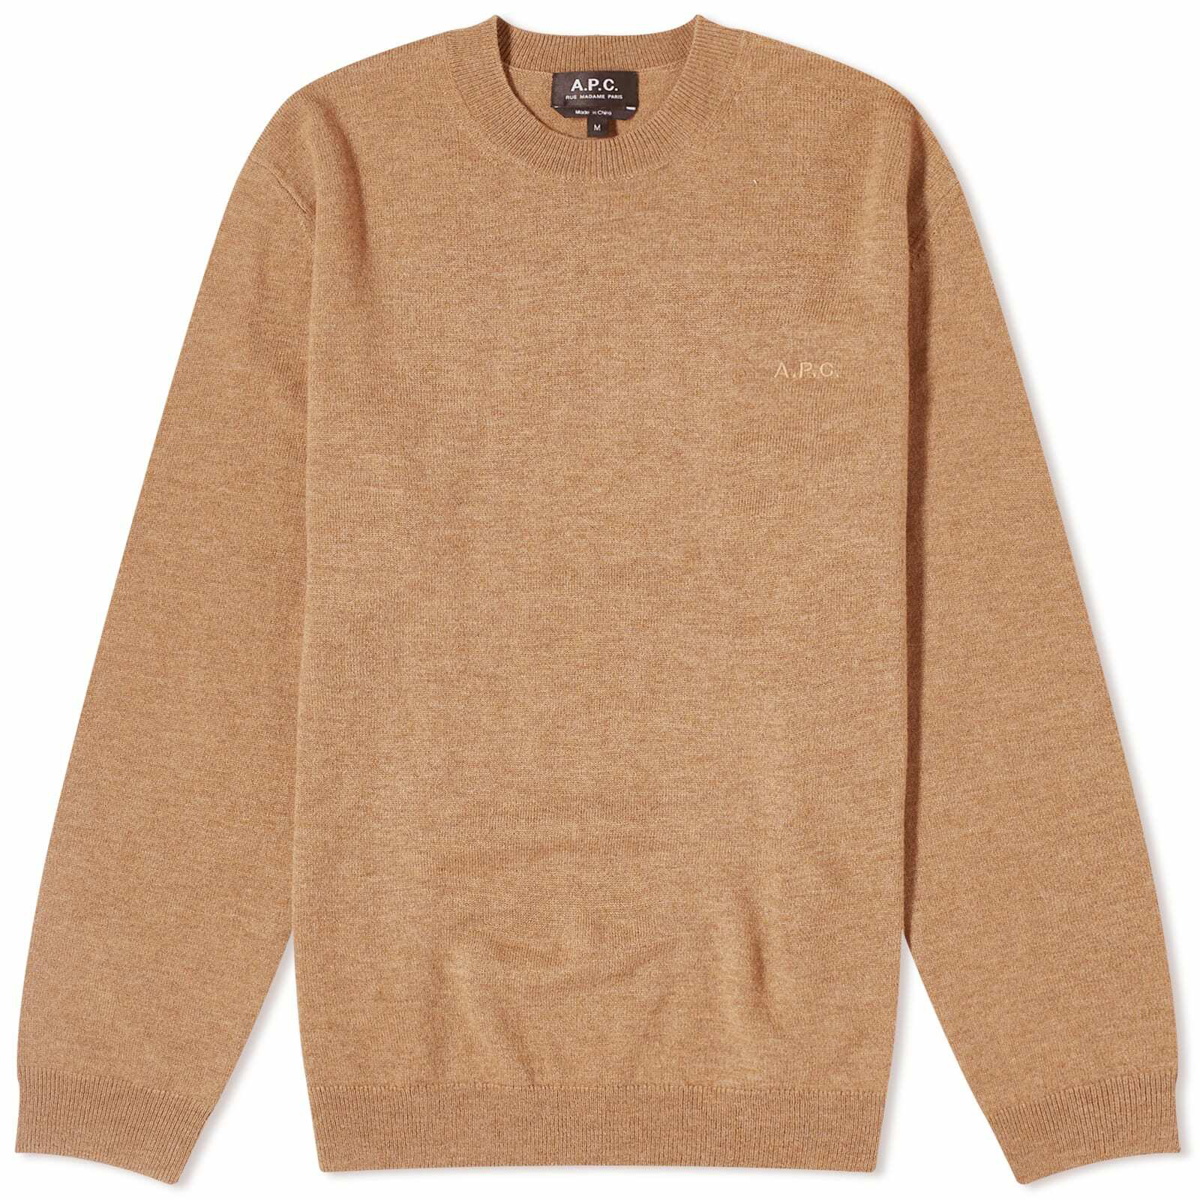 A.P.C. Navy & White JW Anderson Edition Noah Sweater A.P.C.